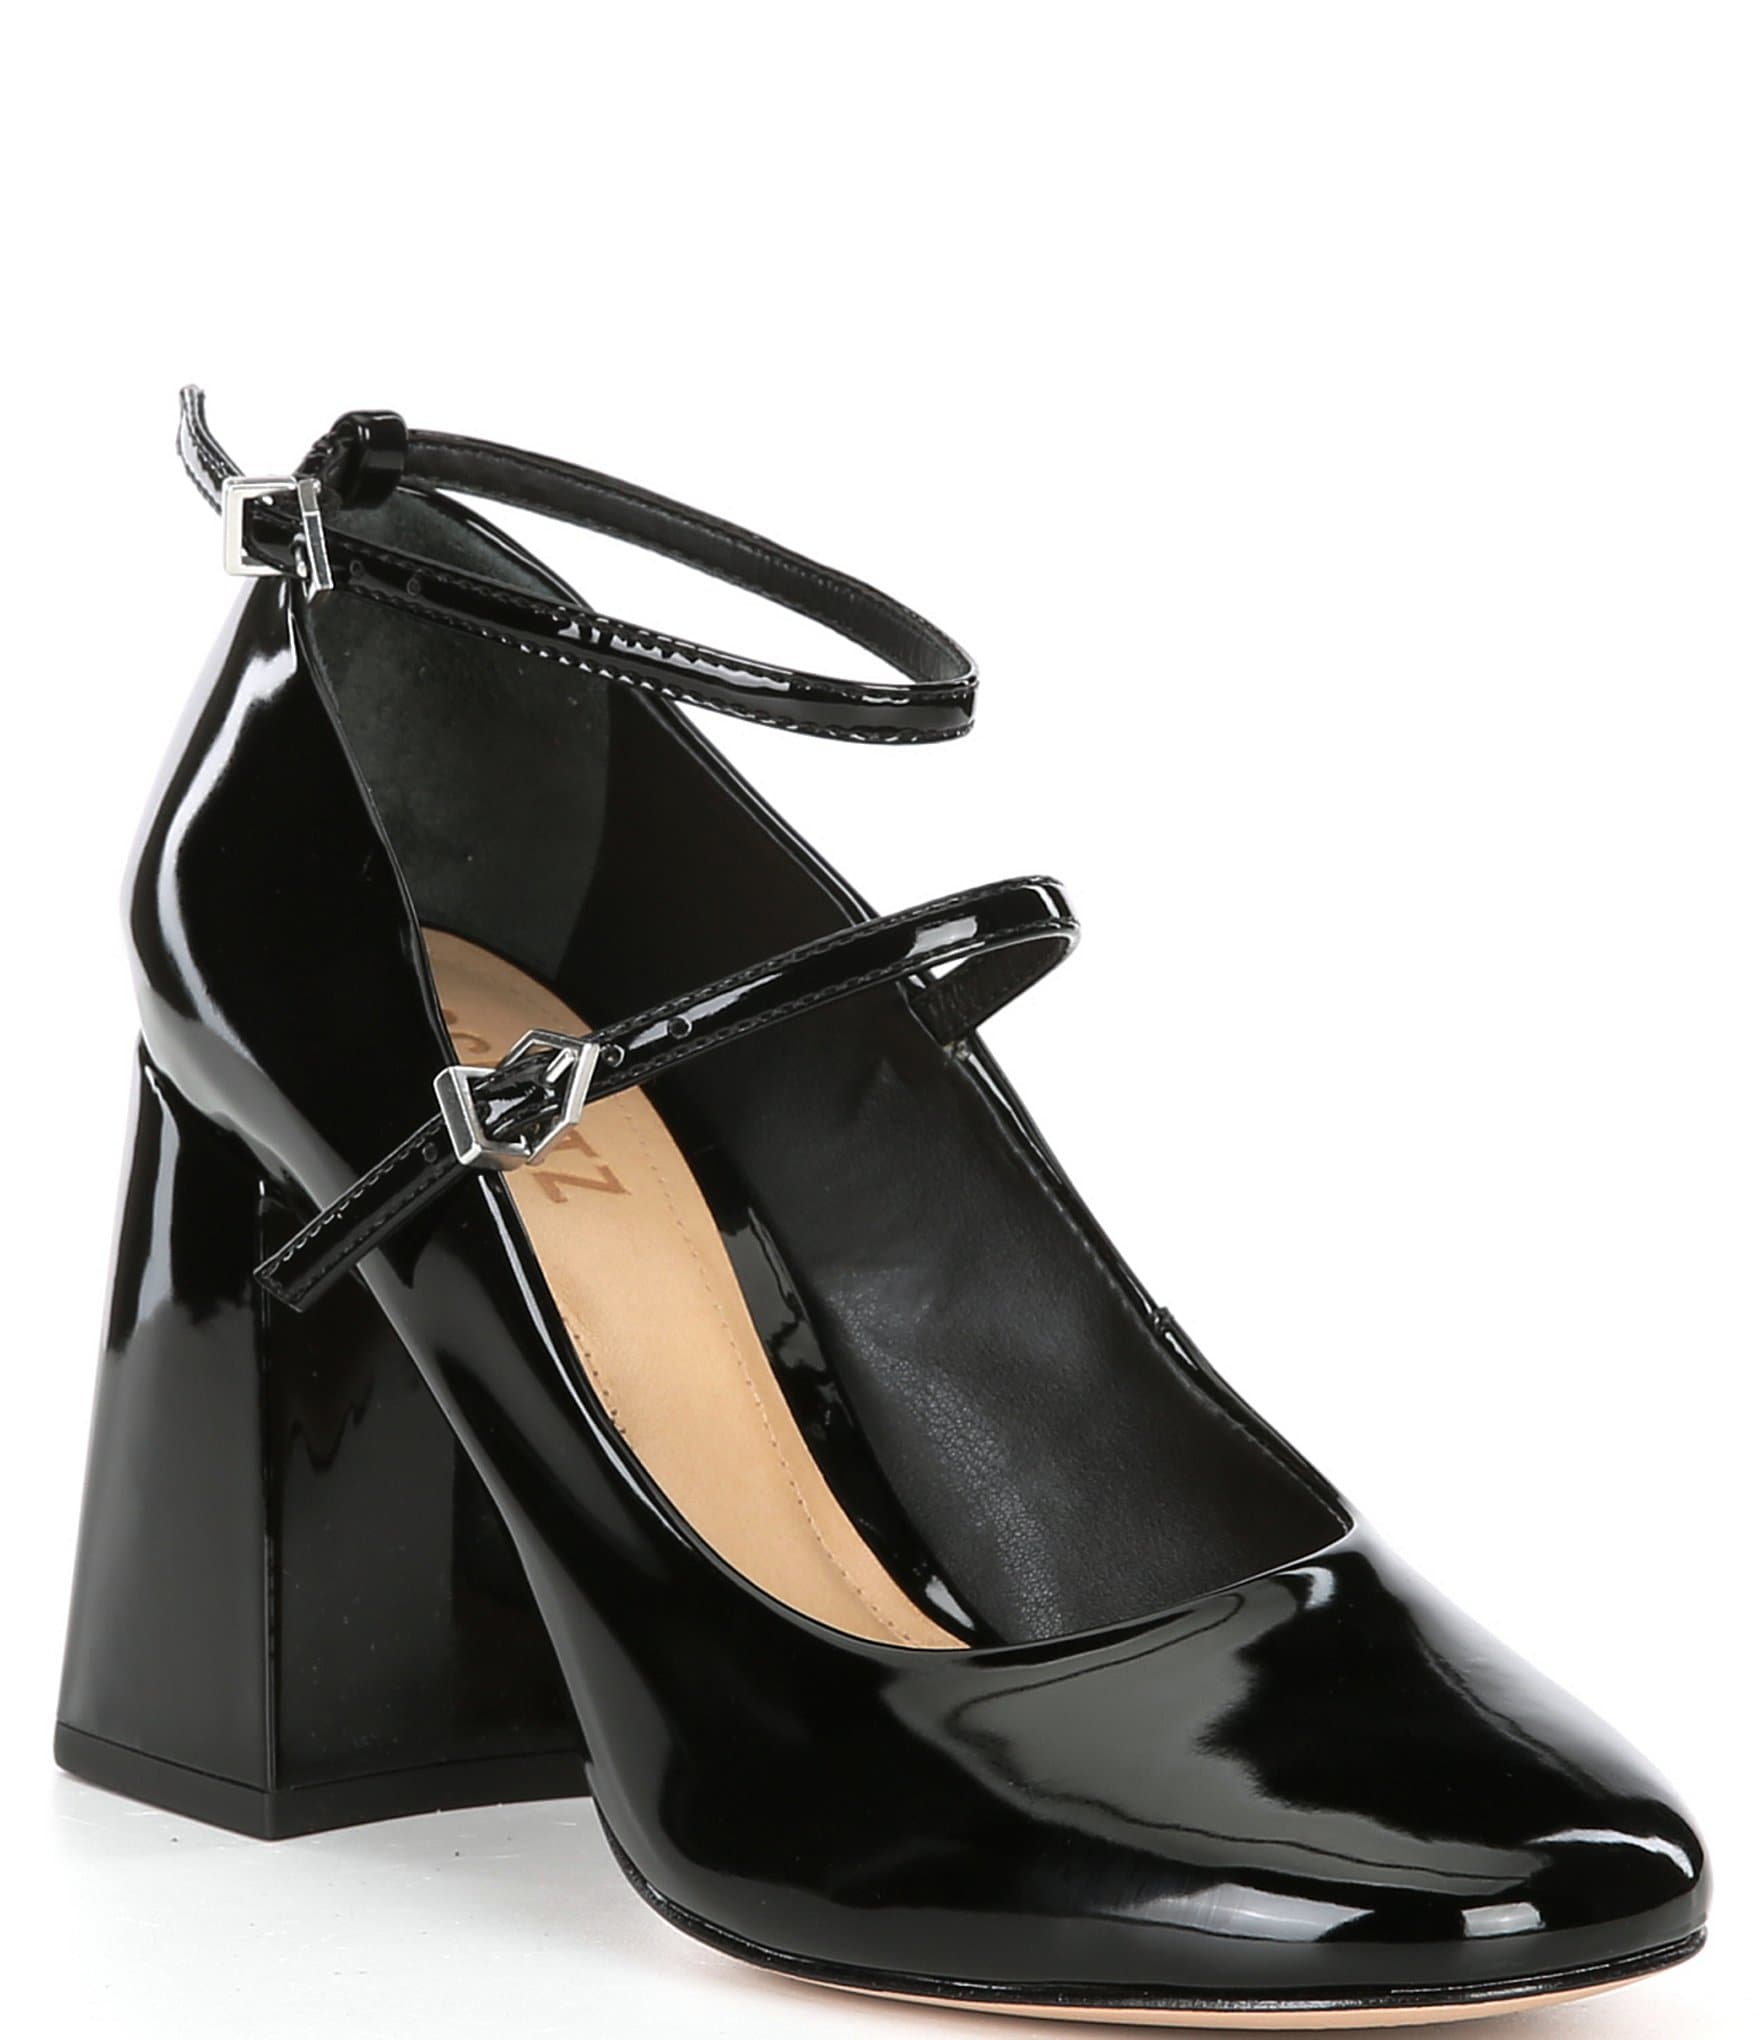 Mary Jane Heeled Pumps for Women Black Patent || Ankle Strap Mary Jane Shoes Leather Block Heels